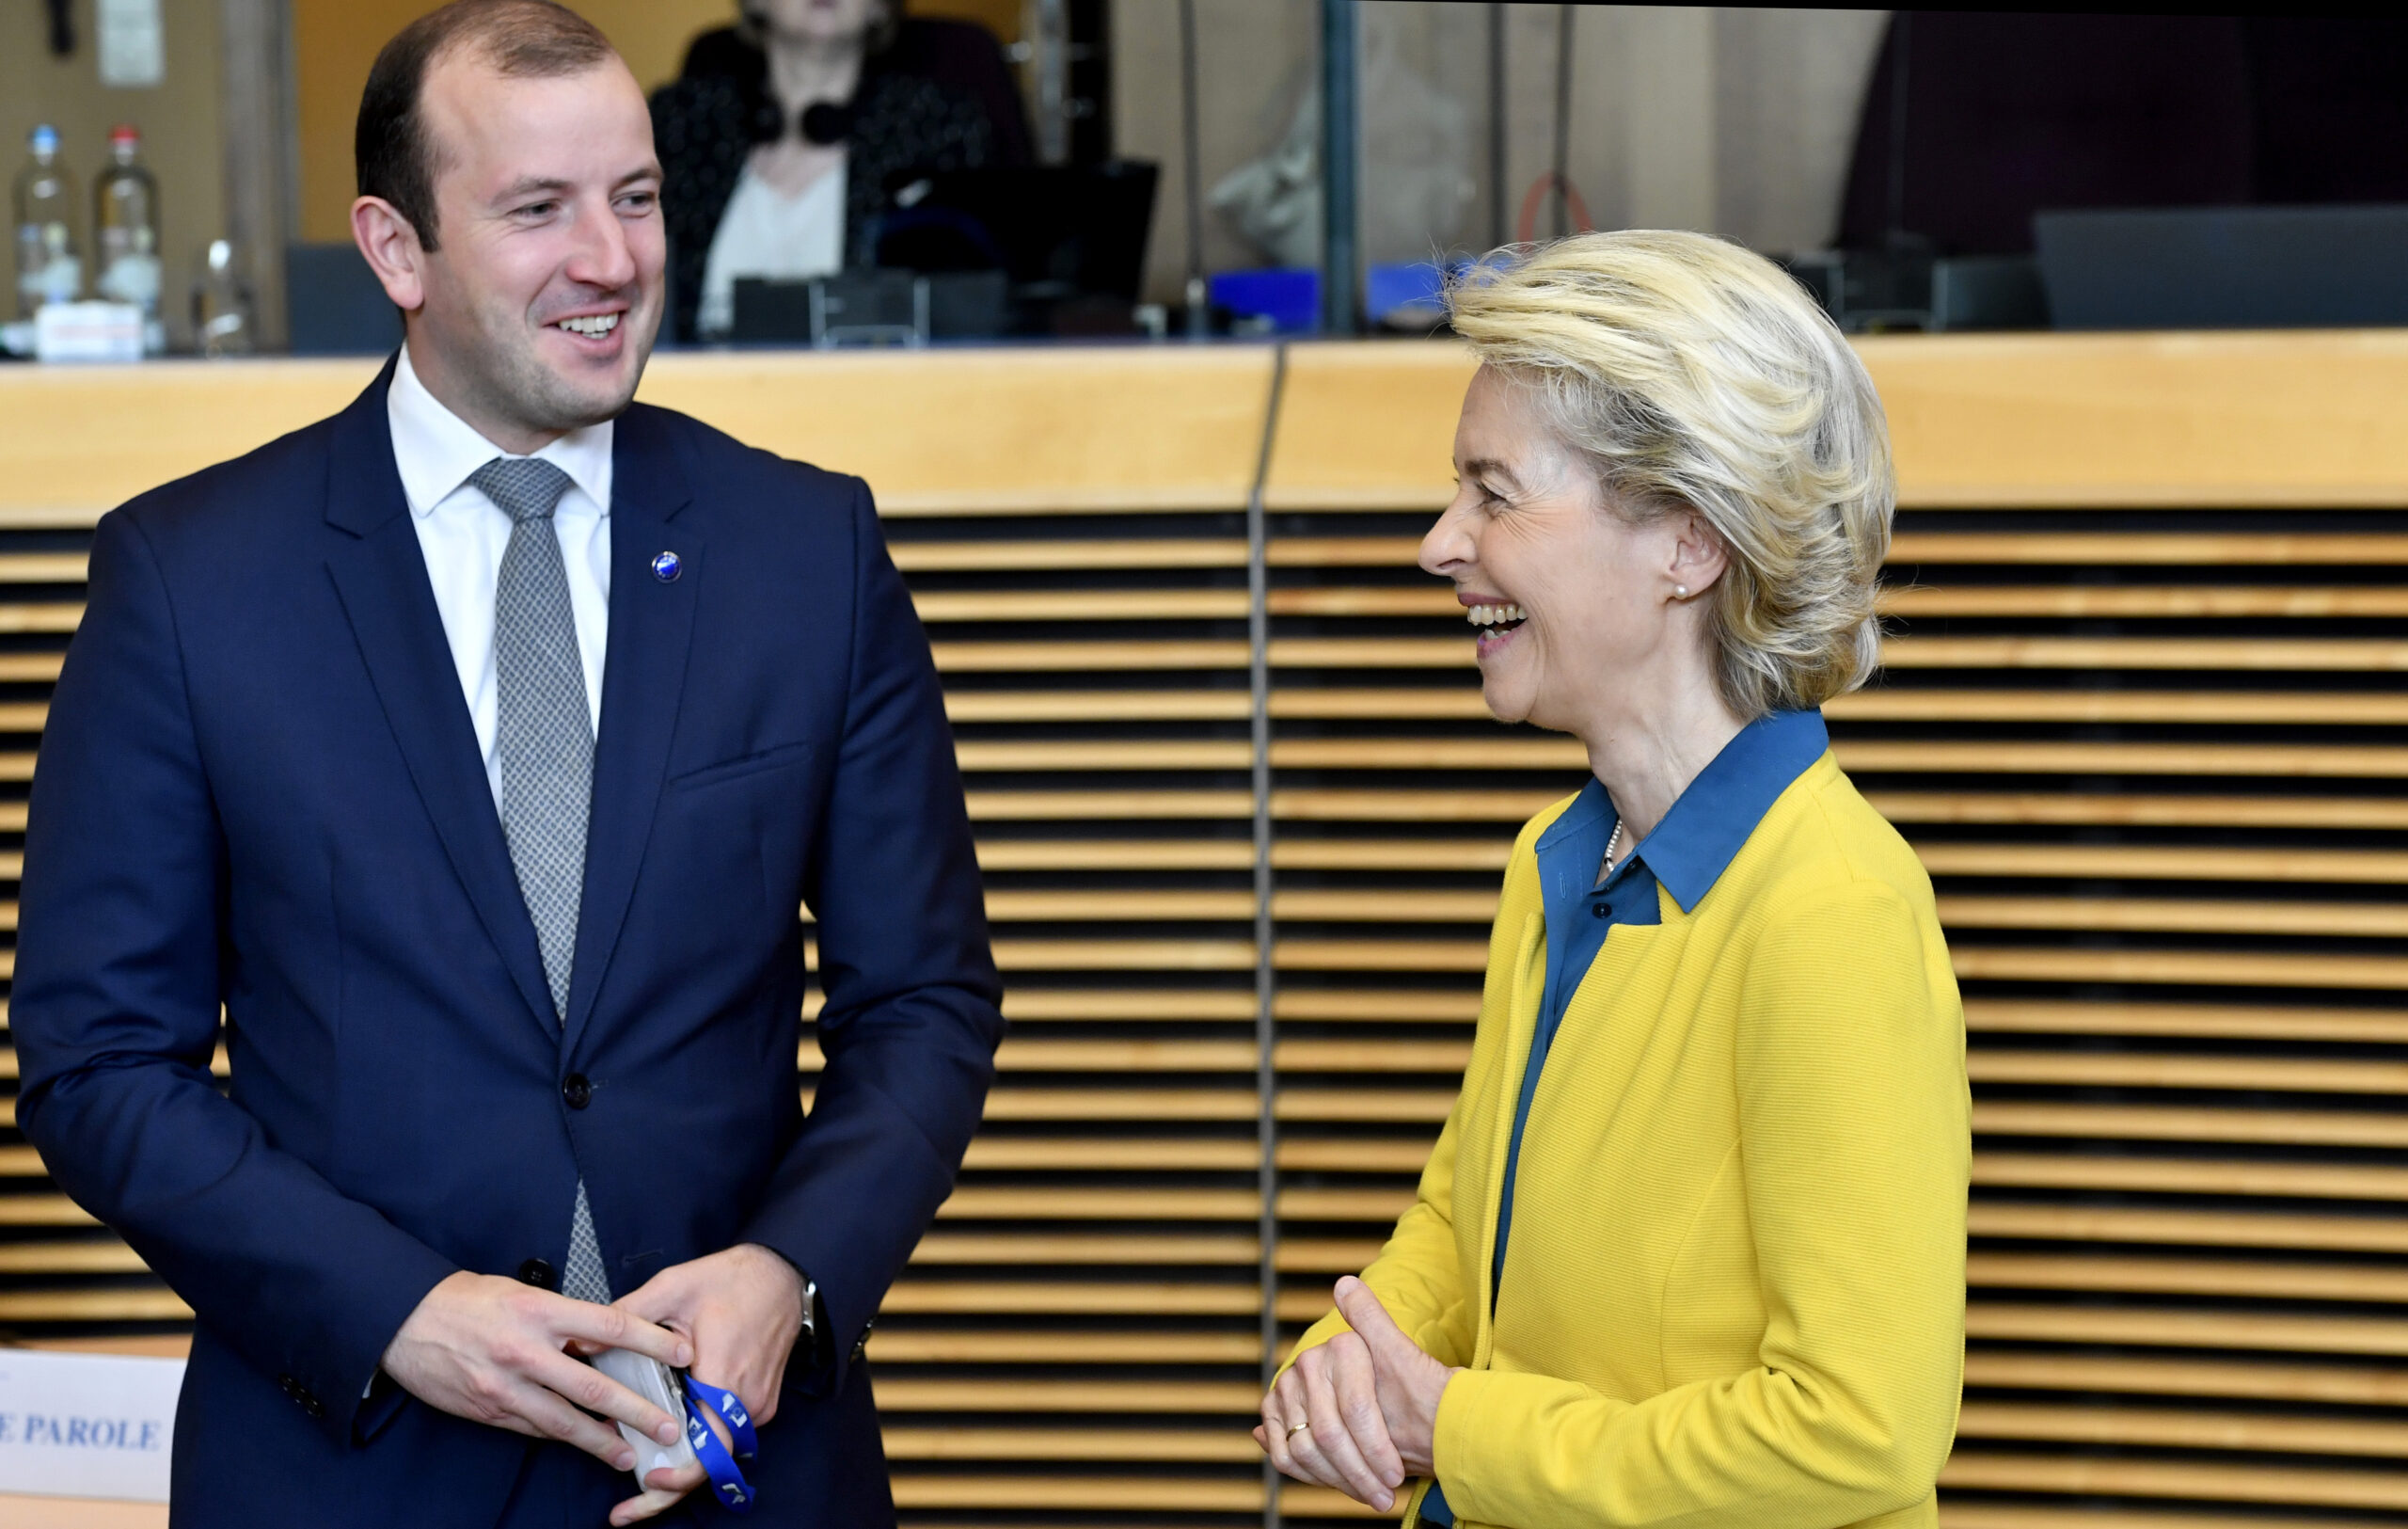 European Commission President Ursula von der Leyen, right, speaks with European Commissioner for Environment and Oceans Virginijus Sinkevicius during a meeting of the College of Commissioners at EU headquarters in Brussels, Friday, June 17, 2022. Ukraine's request to join the European Union may advance Friday with a recommendation from the EU's executive arm that the war-torn country deserves to become a candidate for membership in the 27-nation bloc. (AP Photo/Geert Vanden Wijngaert)